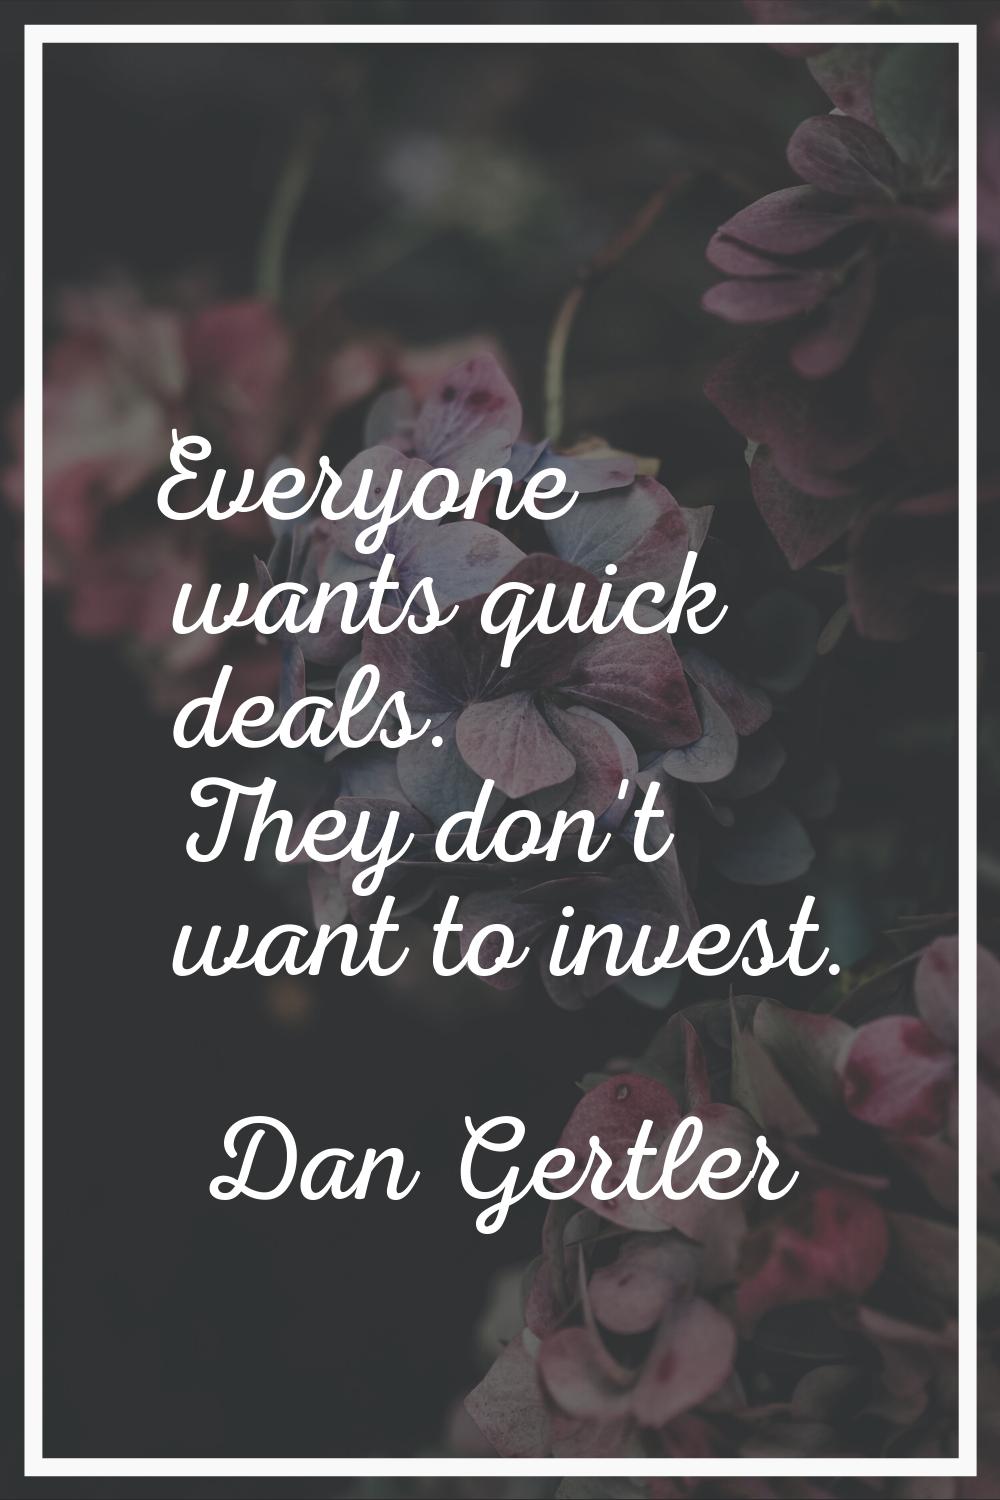 Everyone wants quick deals. They don't want to invest.